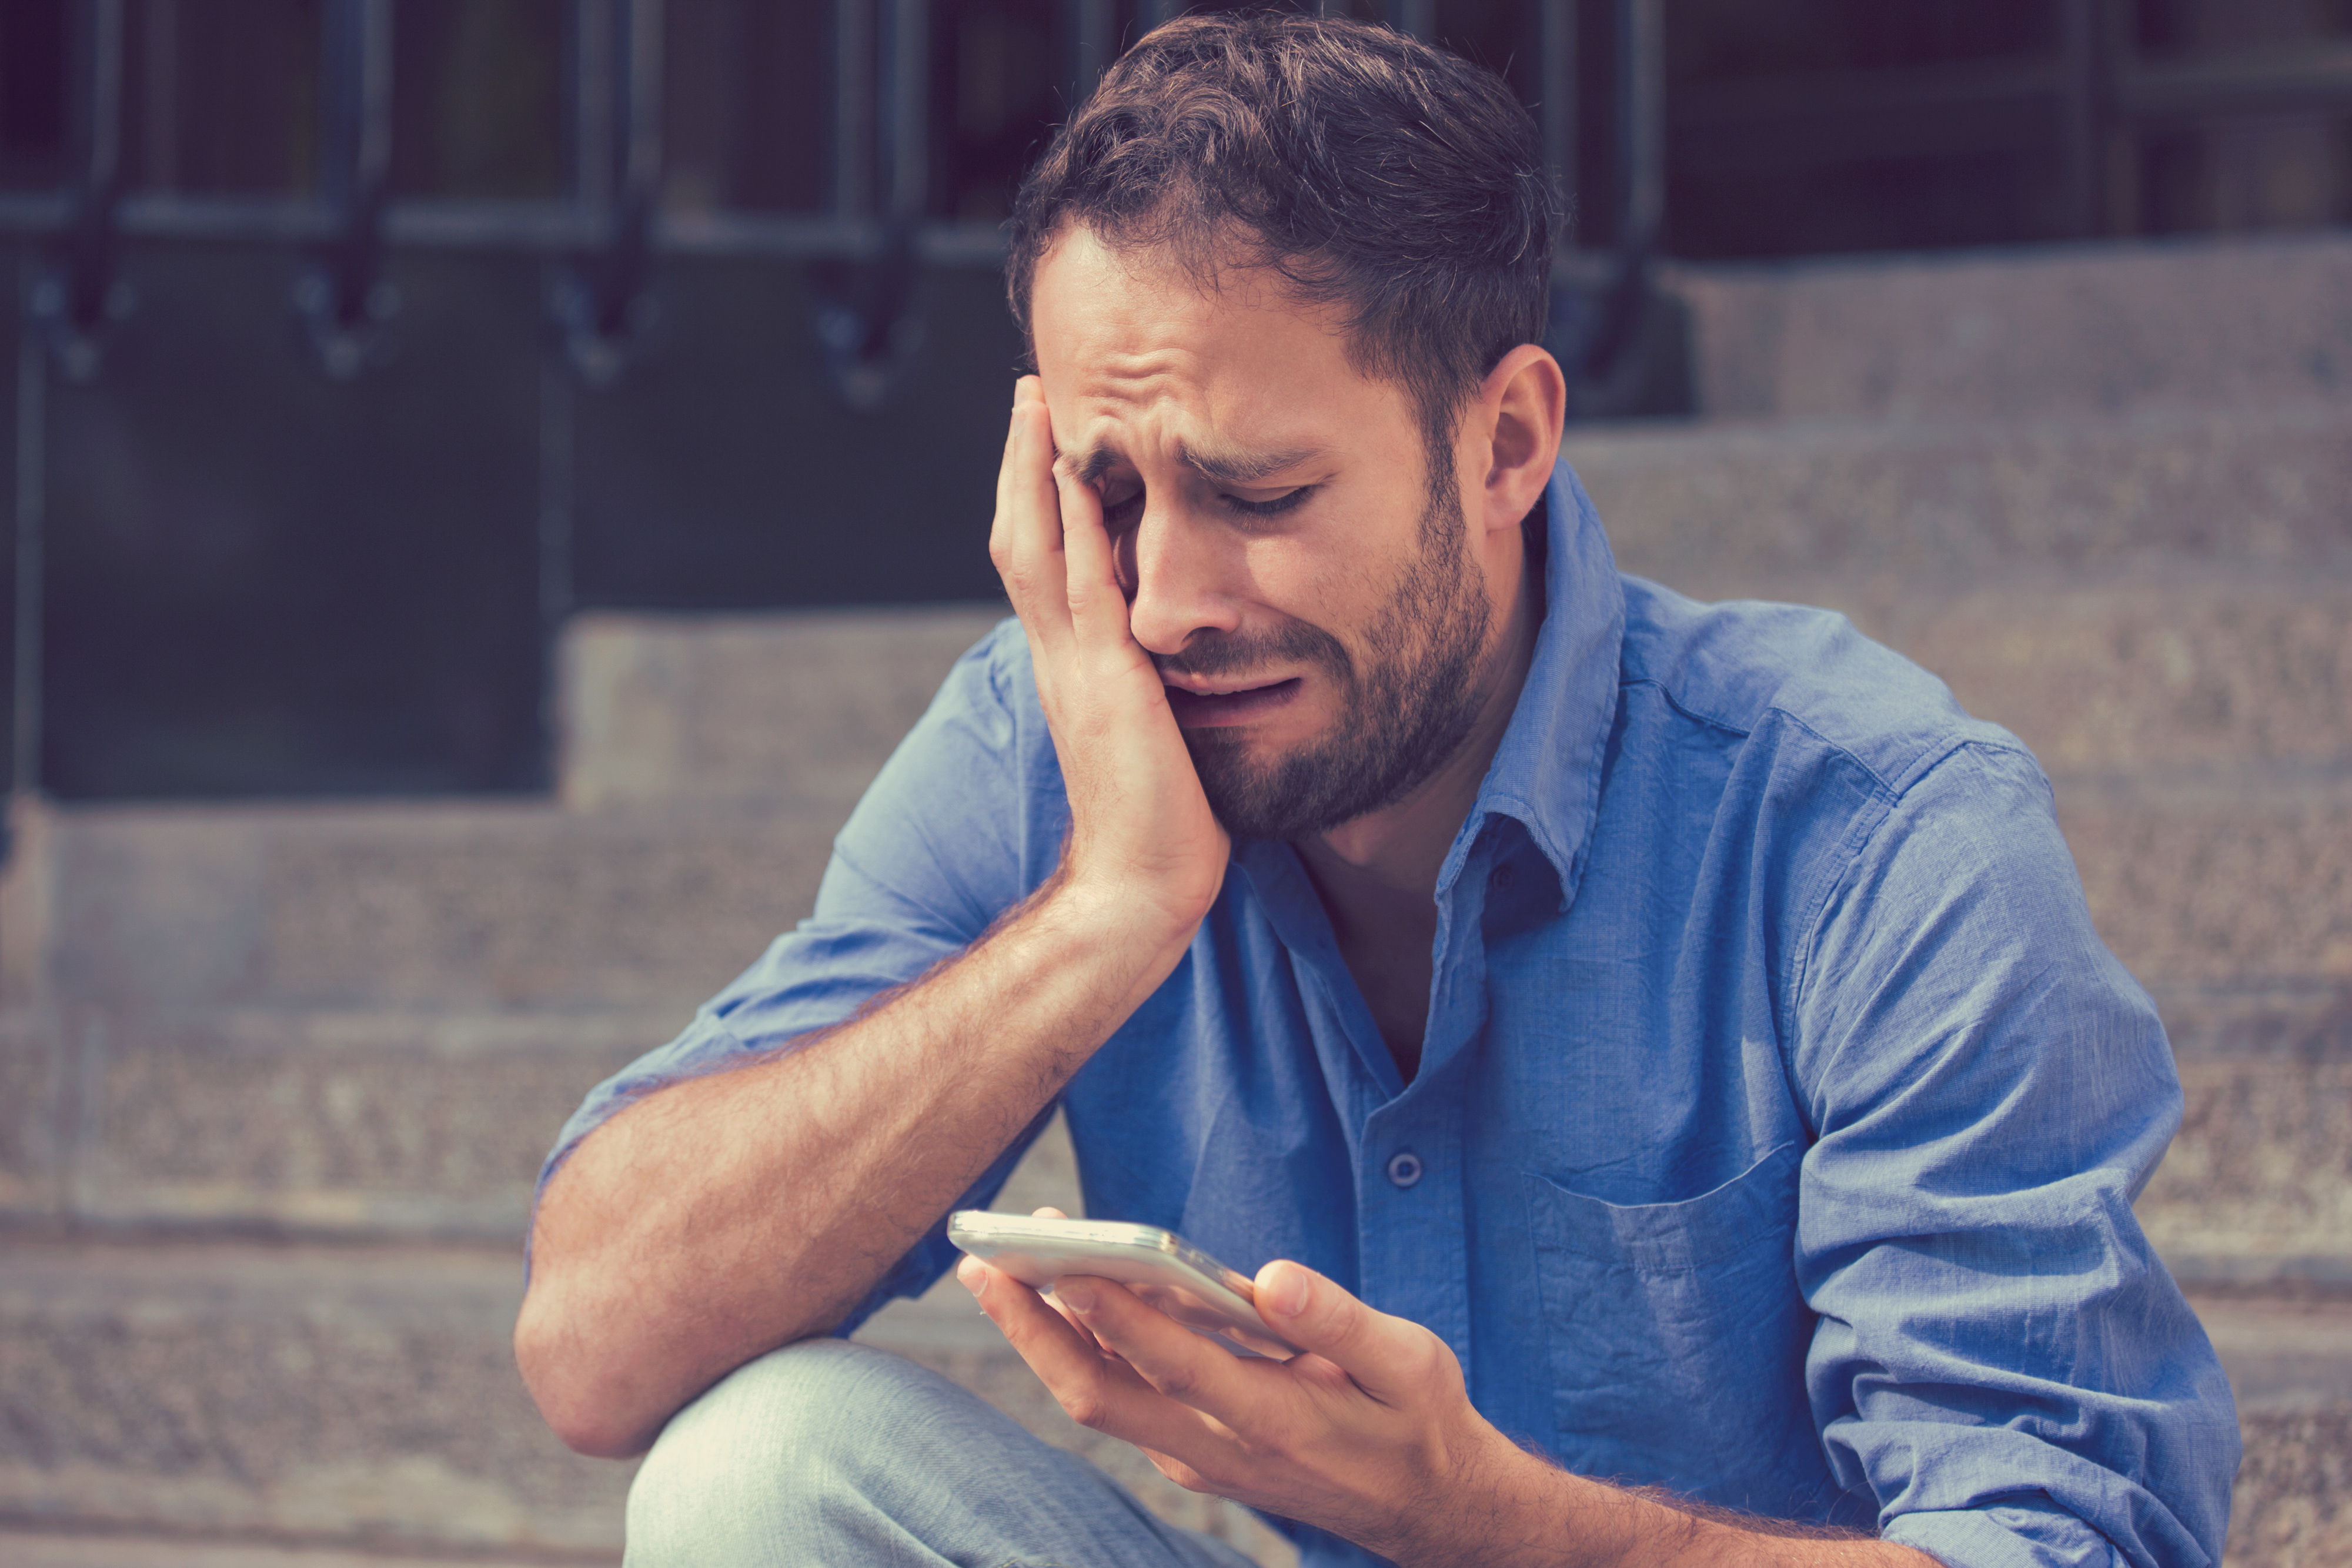 Crying man looking at his phone | Source: Shutterstock